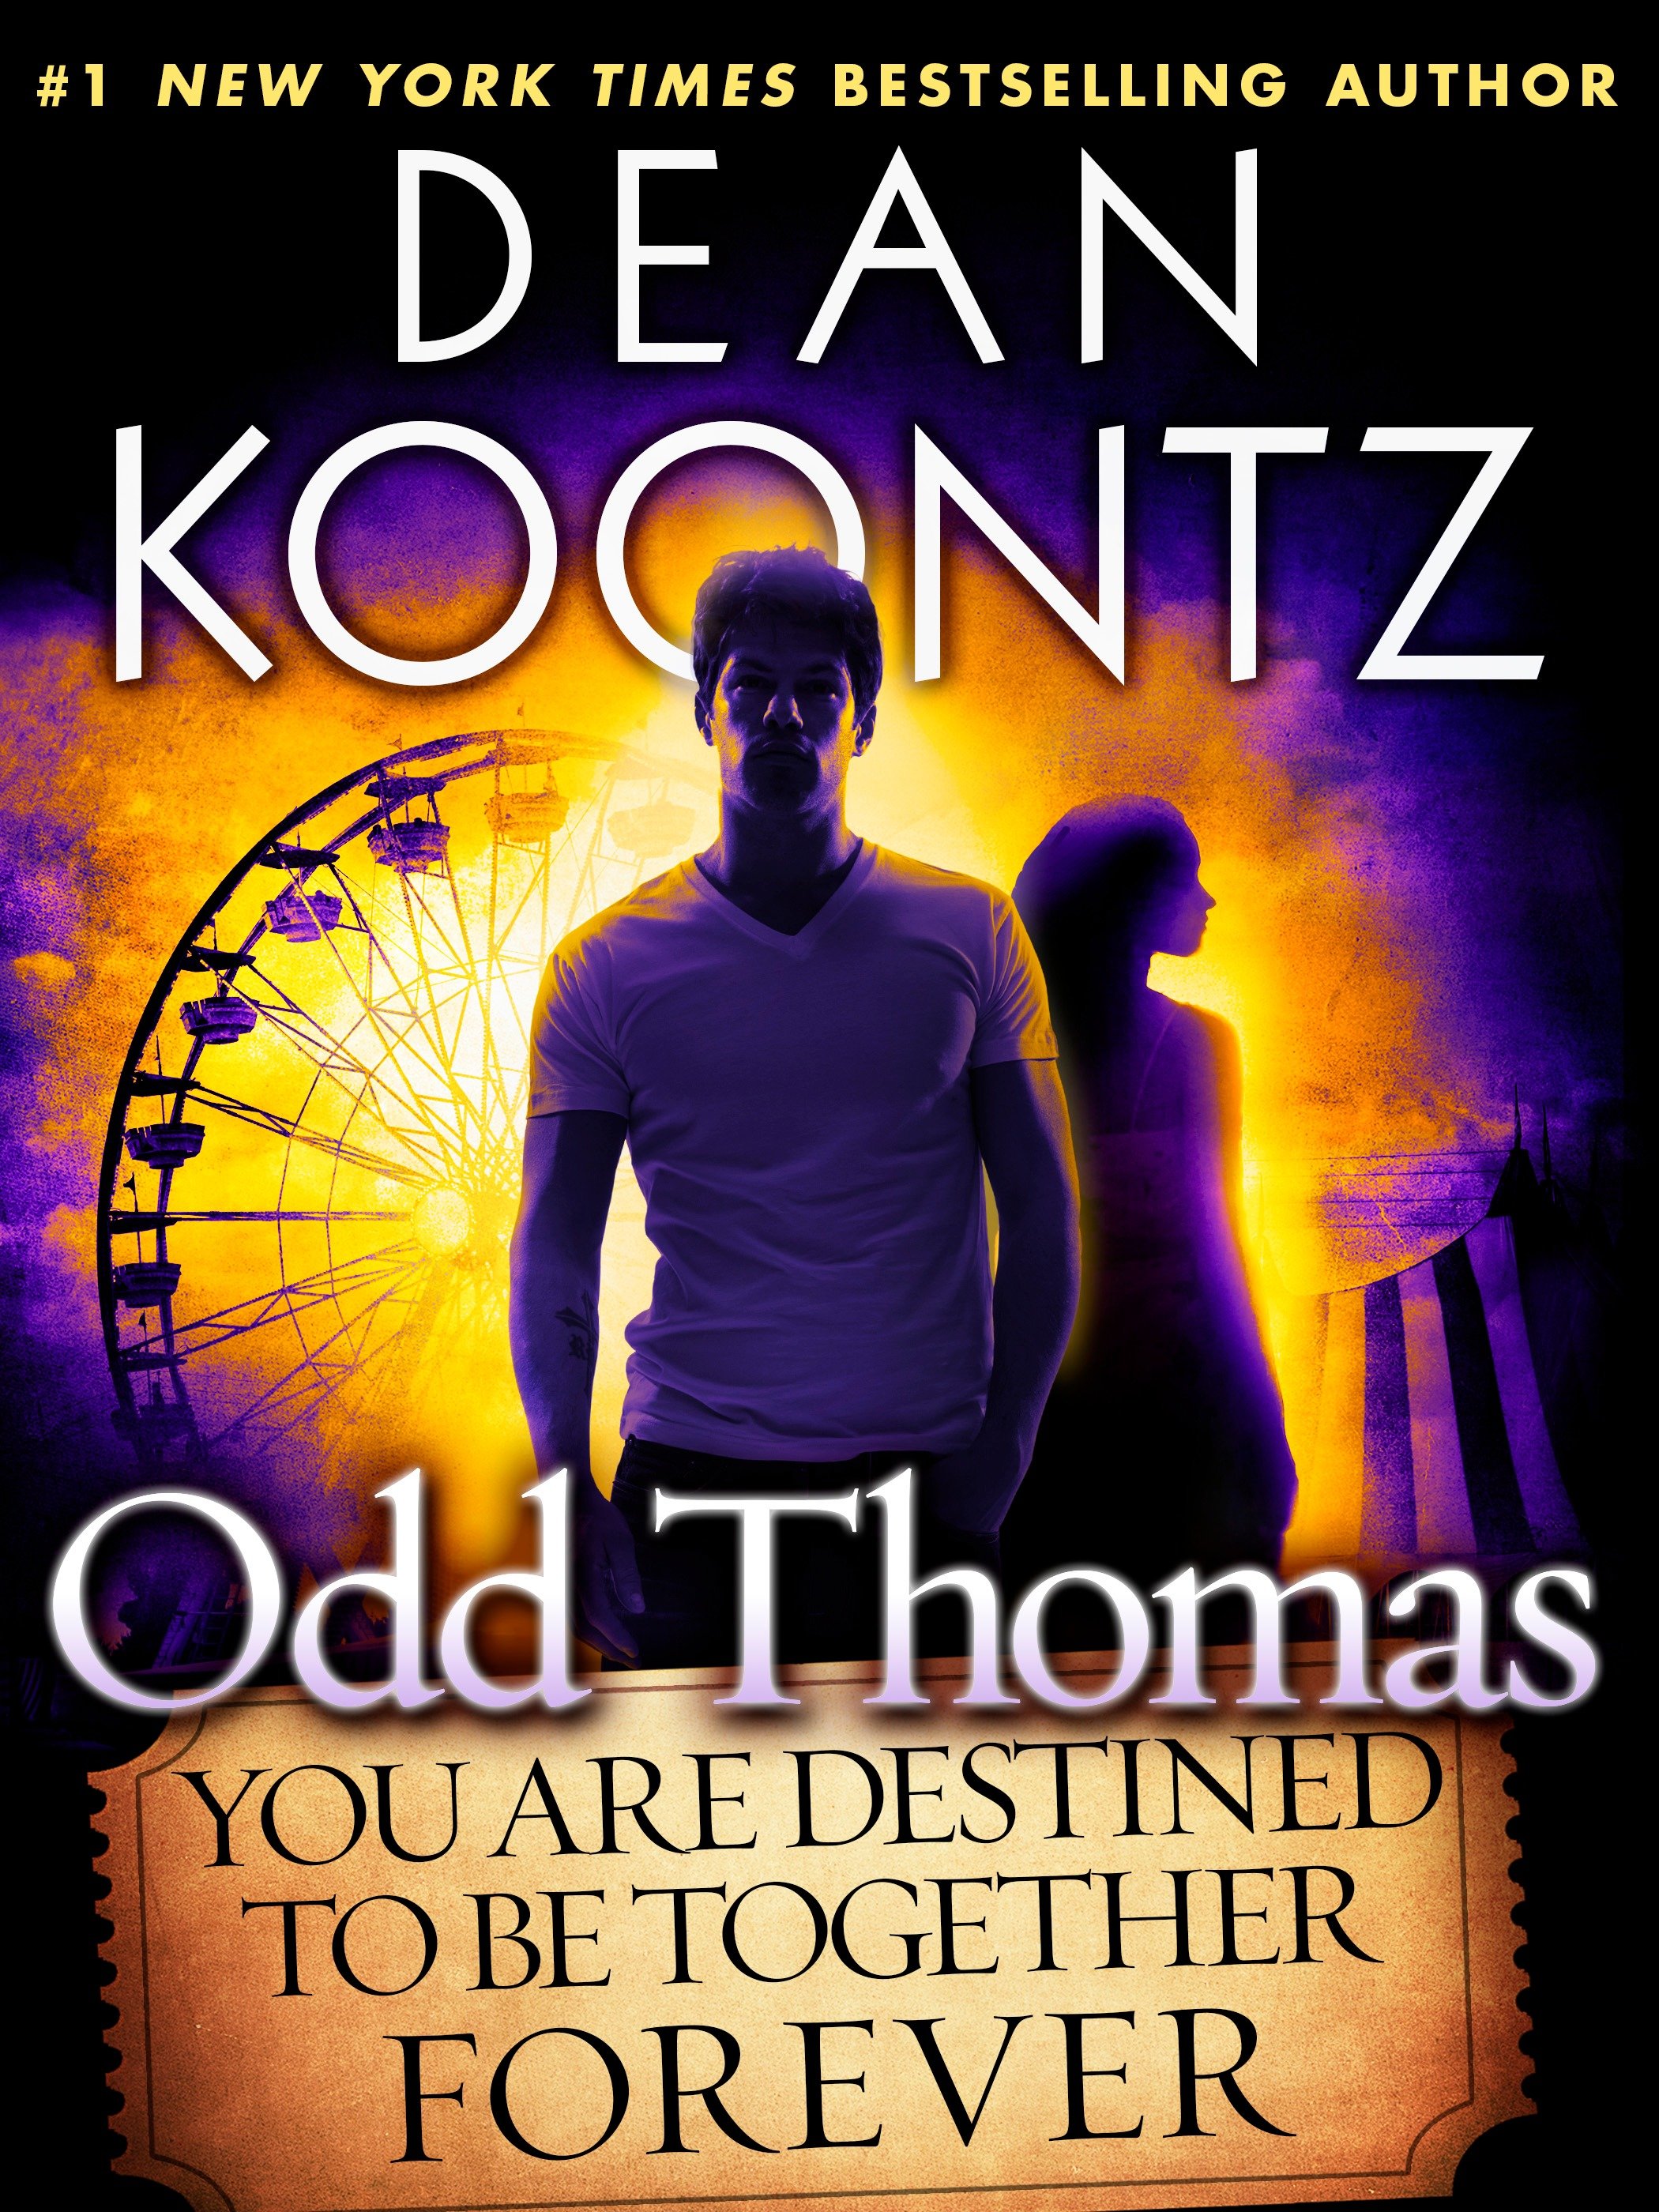 Umschlagbild für Odd Thomas: You Are Destined to Be Together Forever (Short Story) [electronic resource] :